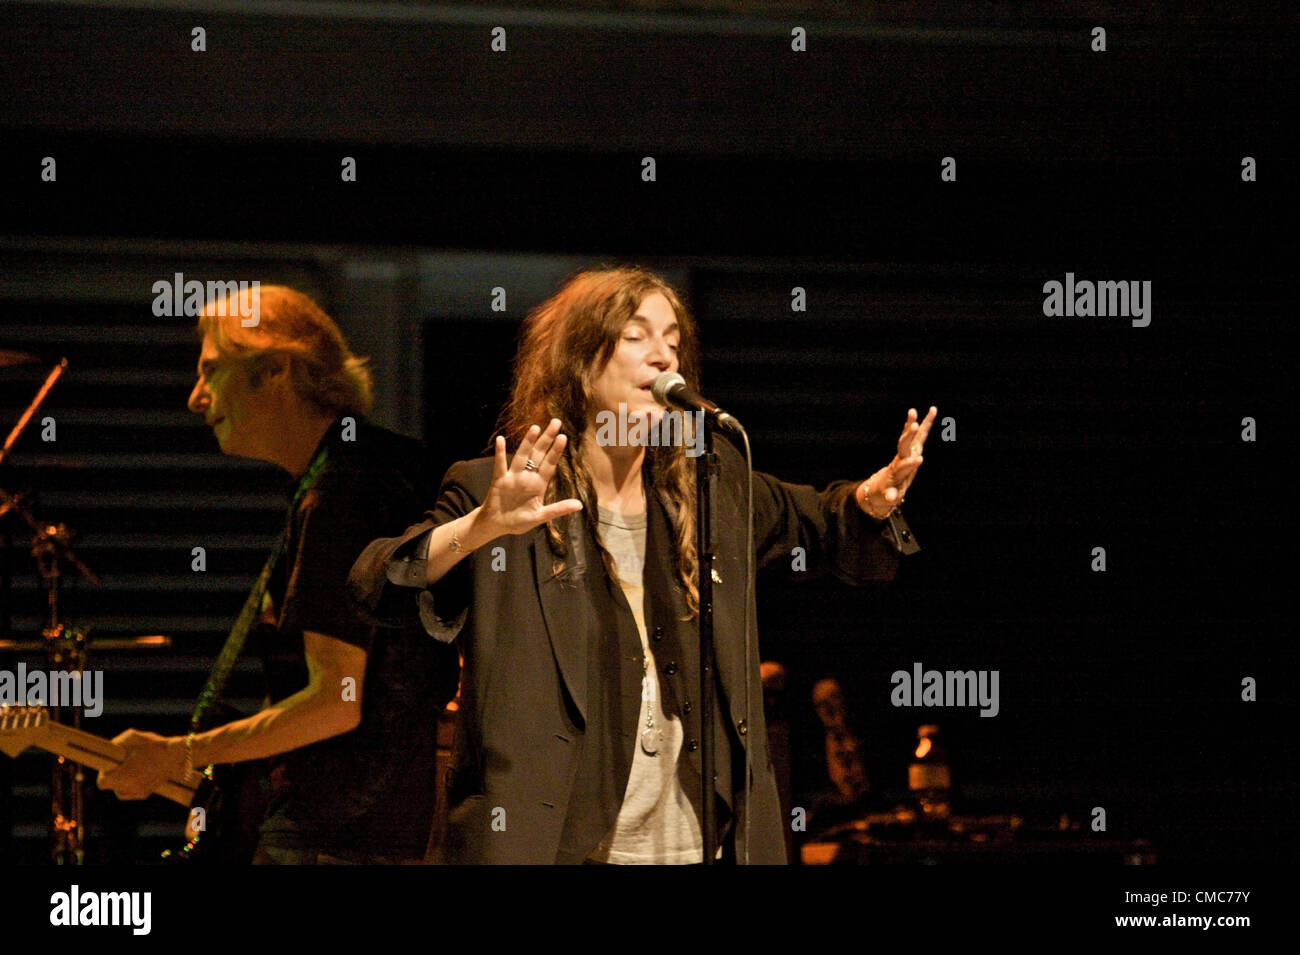 BOLOGNA, ITALY - JUL 15: Patty Smith [international singer], performing for the Memories of the USTICA's victims (famous airplane crash), in Bologna, Italy on Jul 15, 2012. Stock Photo